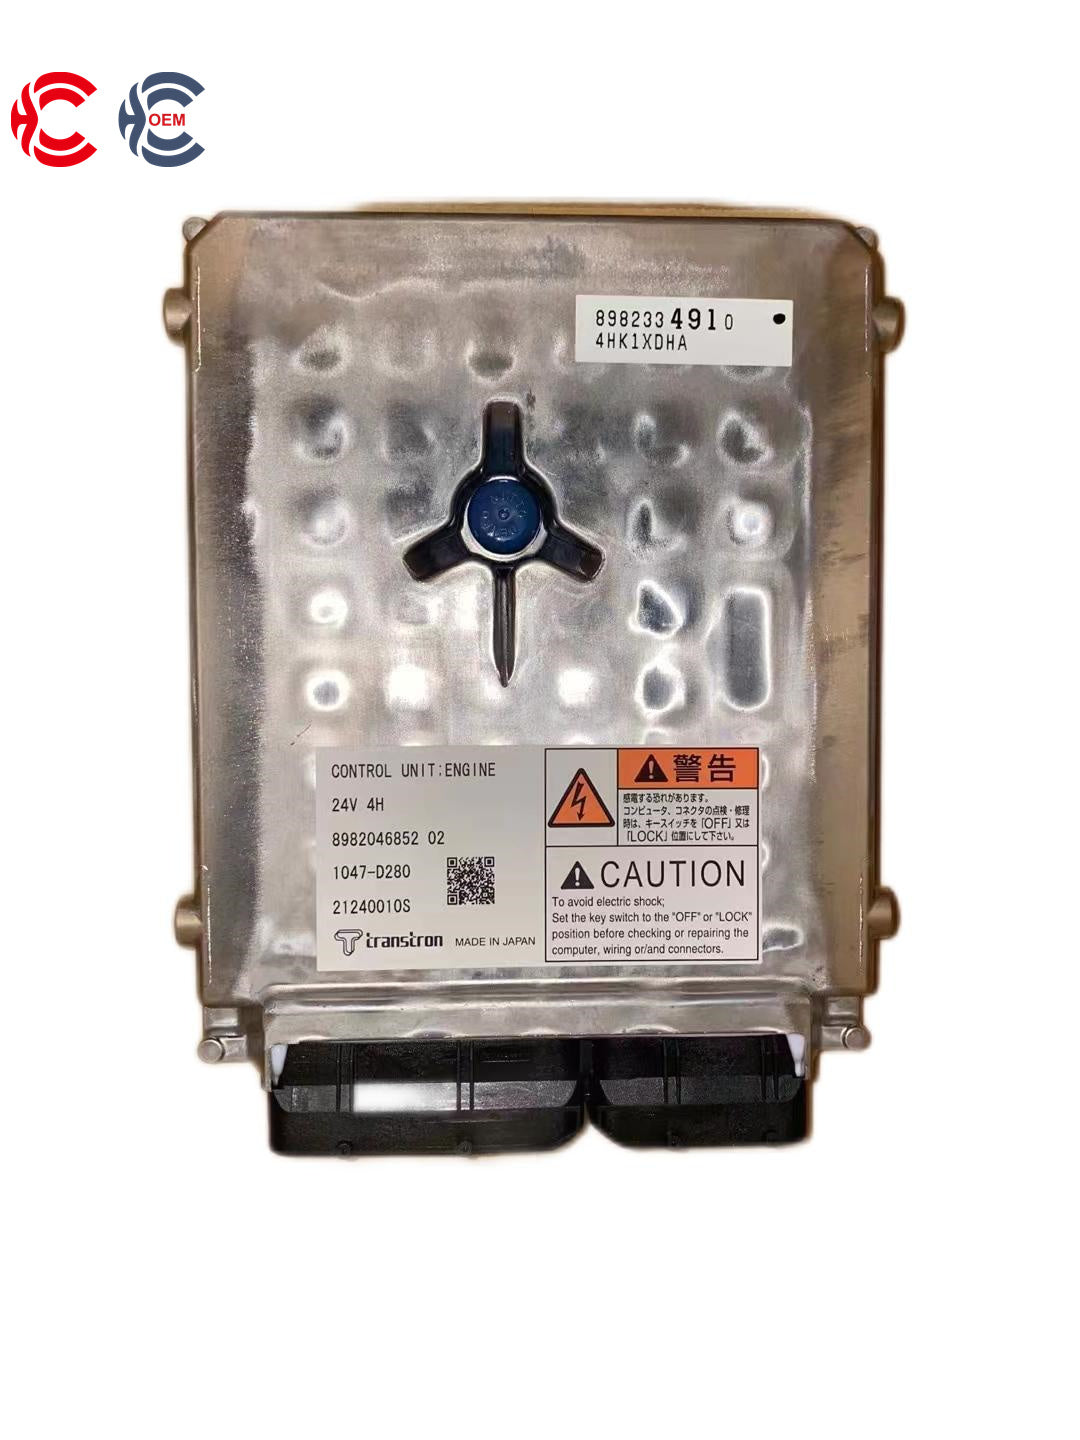 OEM: 8982046852 1047-D280 21240010SMaterial: MetalColor: SilverOrigin: Made in ChinaWeight: 1500gPacking List: 1* ECU Diesel Engine More ServiceWe can provide OEM Manufacturing serviceWe can Be your one-step solution for Auto PartsWe can provide technical scheme for you Feel Free to Contact Us, We will get back to you as soon as possible.